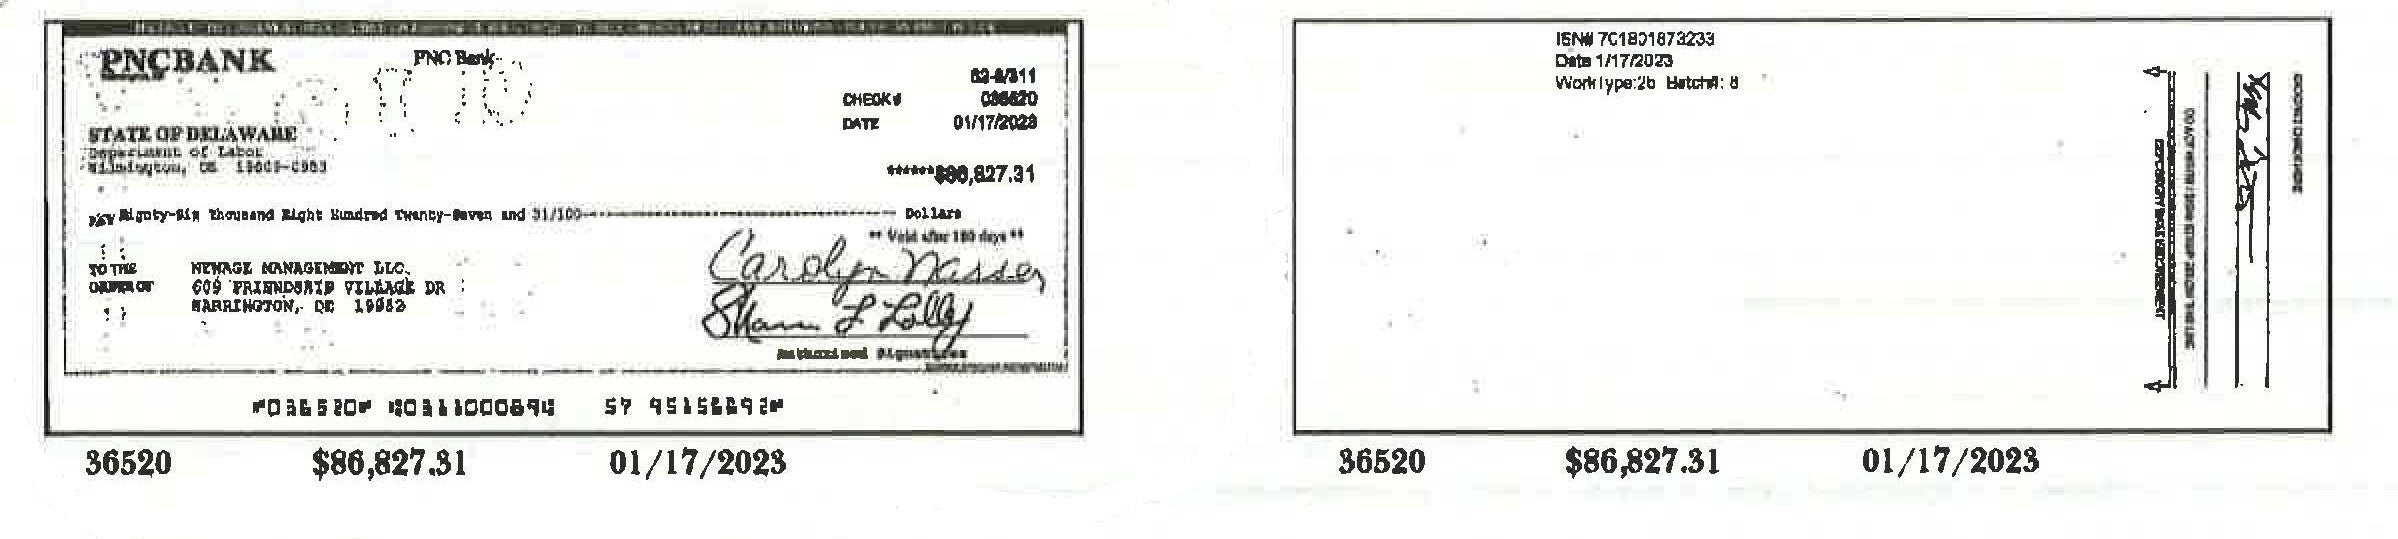 an image of a check